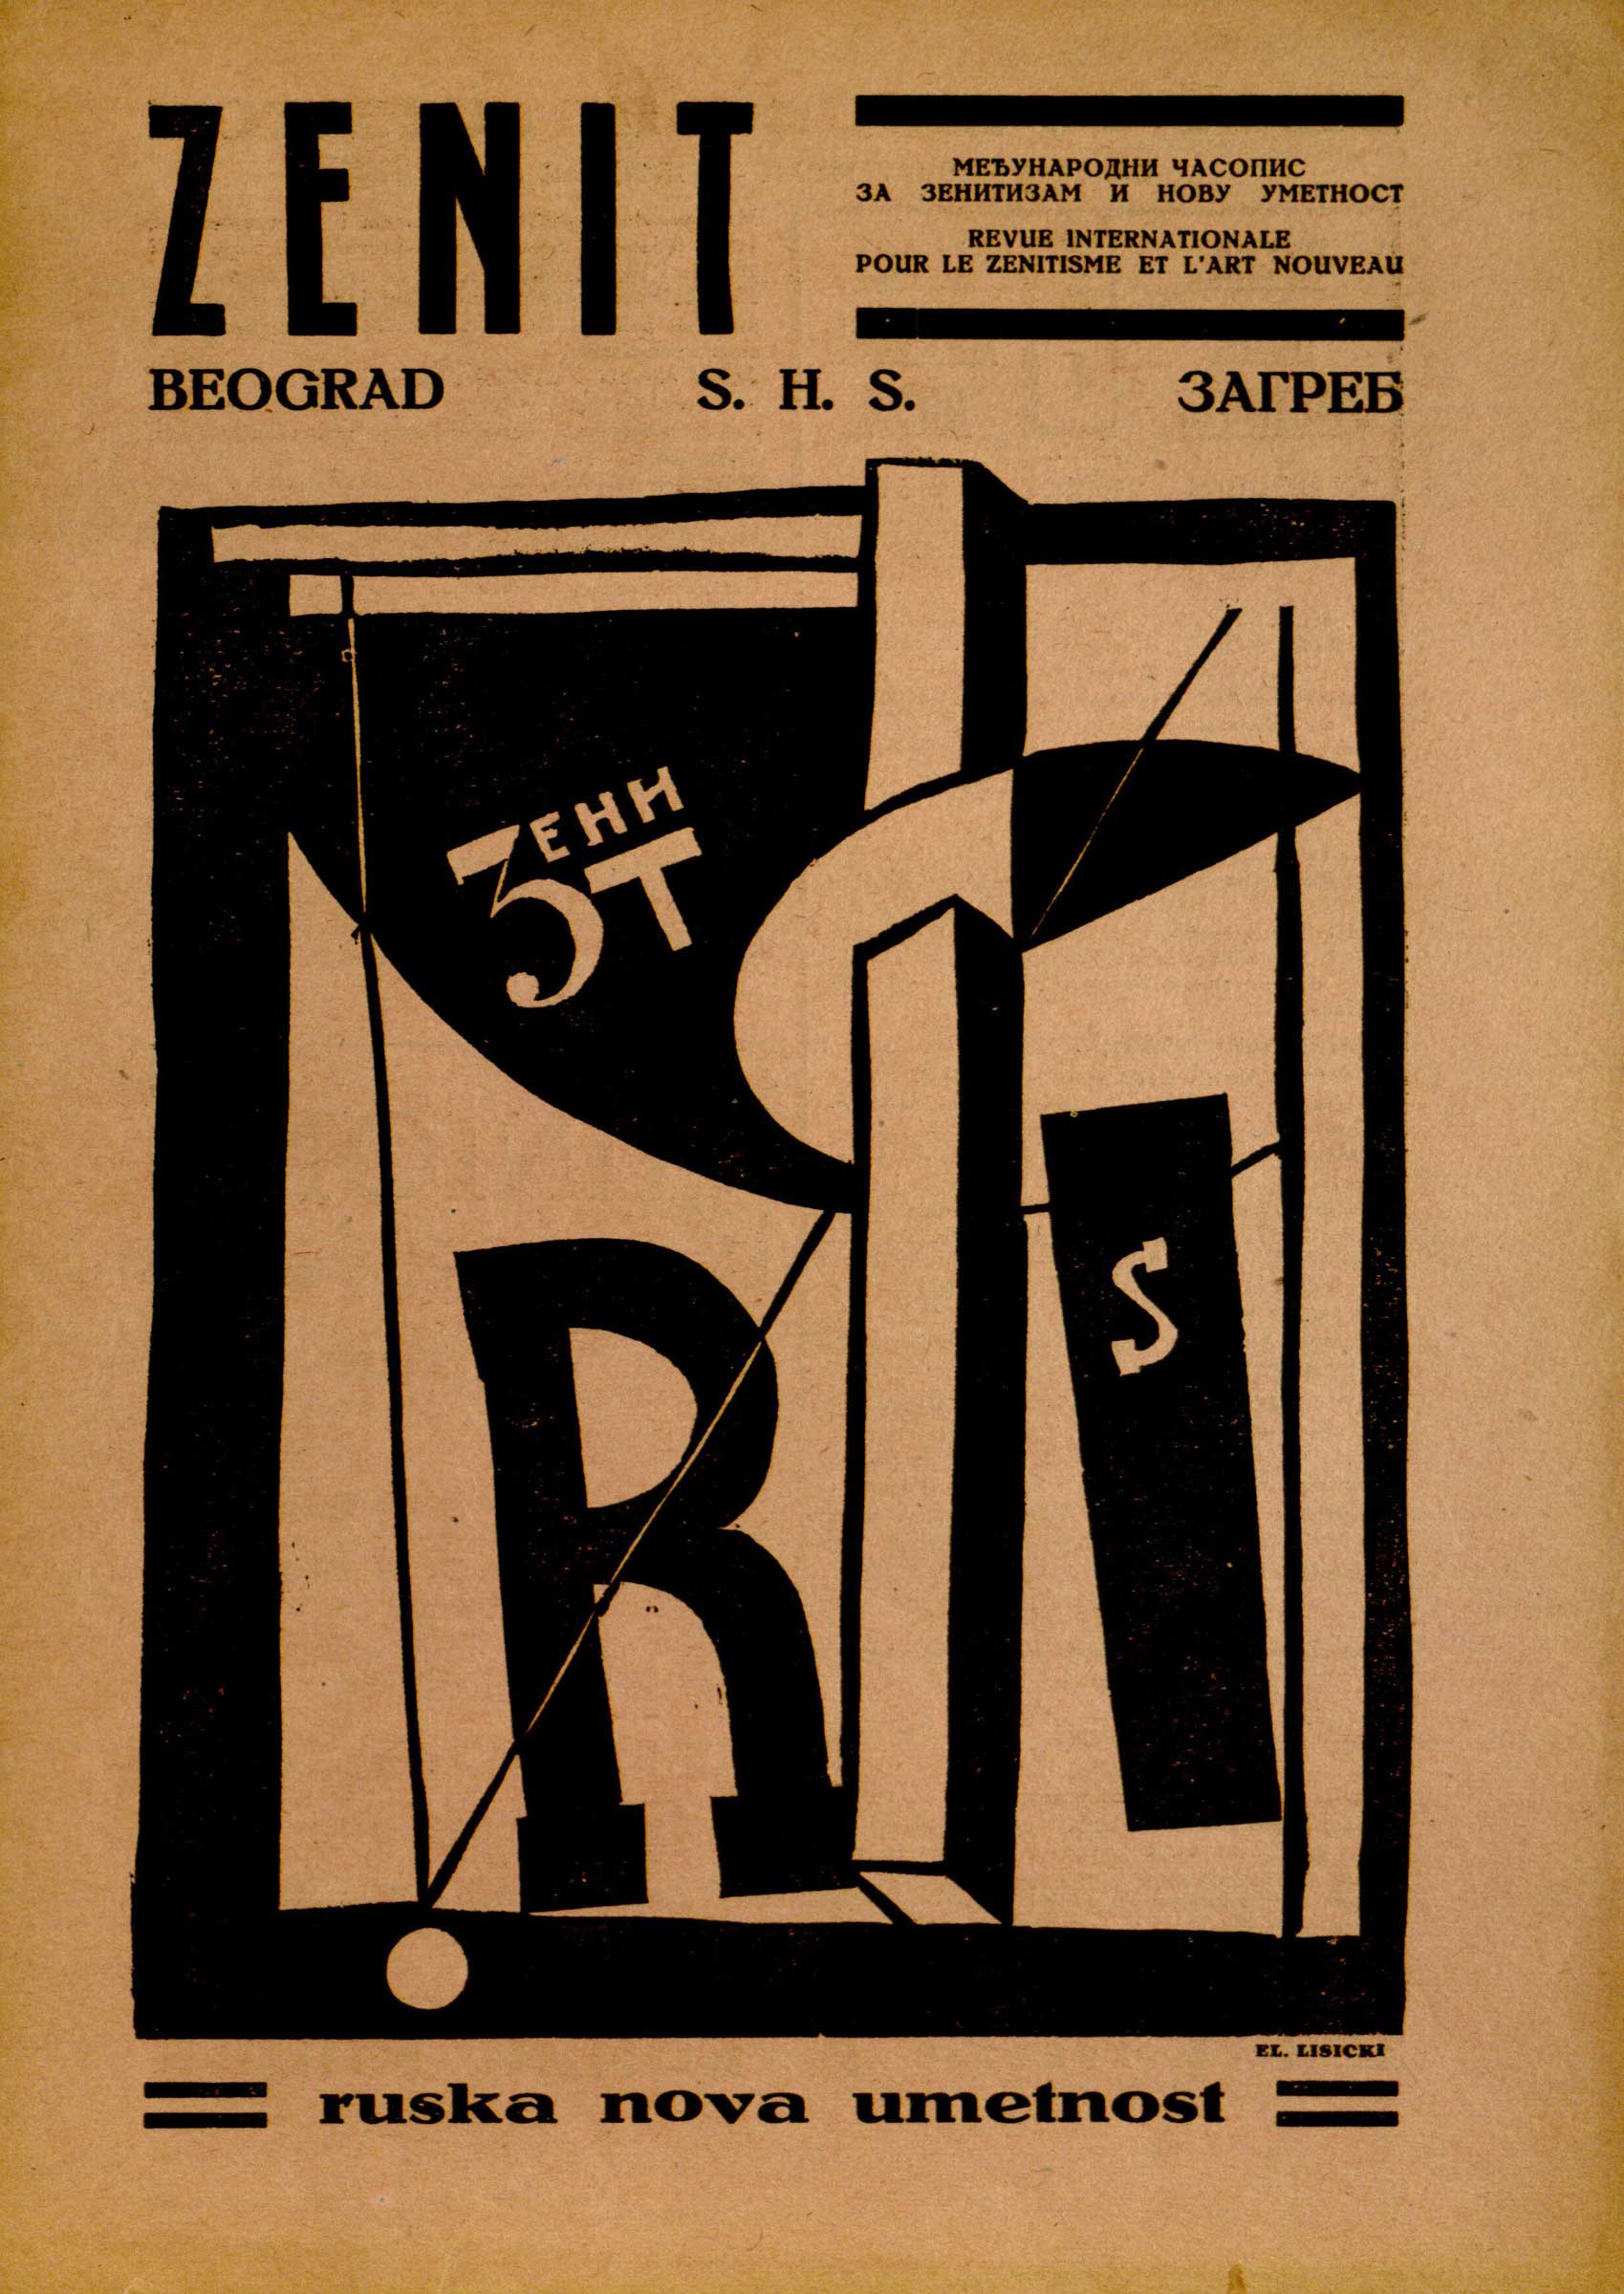 Zenit No. 17-18, 1922. Journal cover. Image courtesy of the Museum of Contemporary Art, Belgrade.